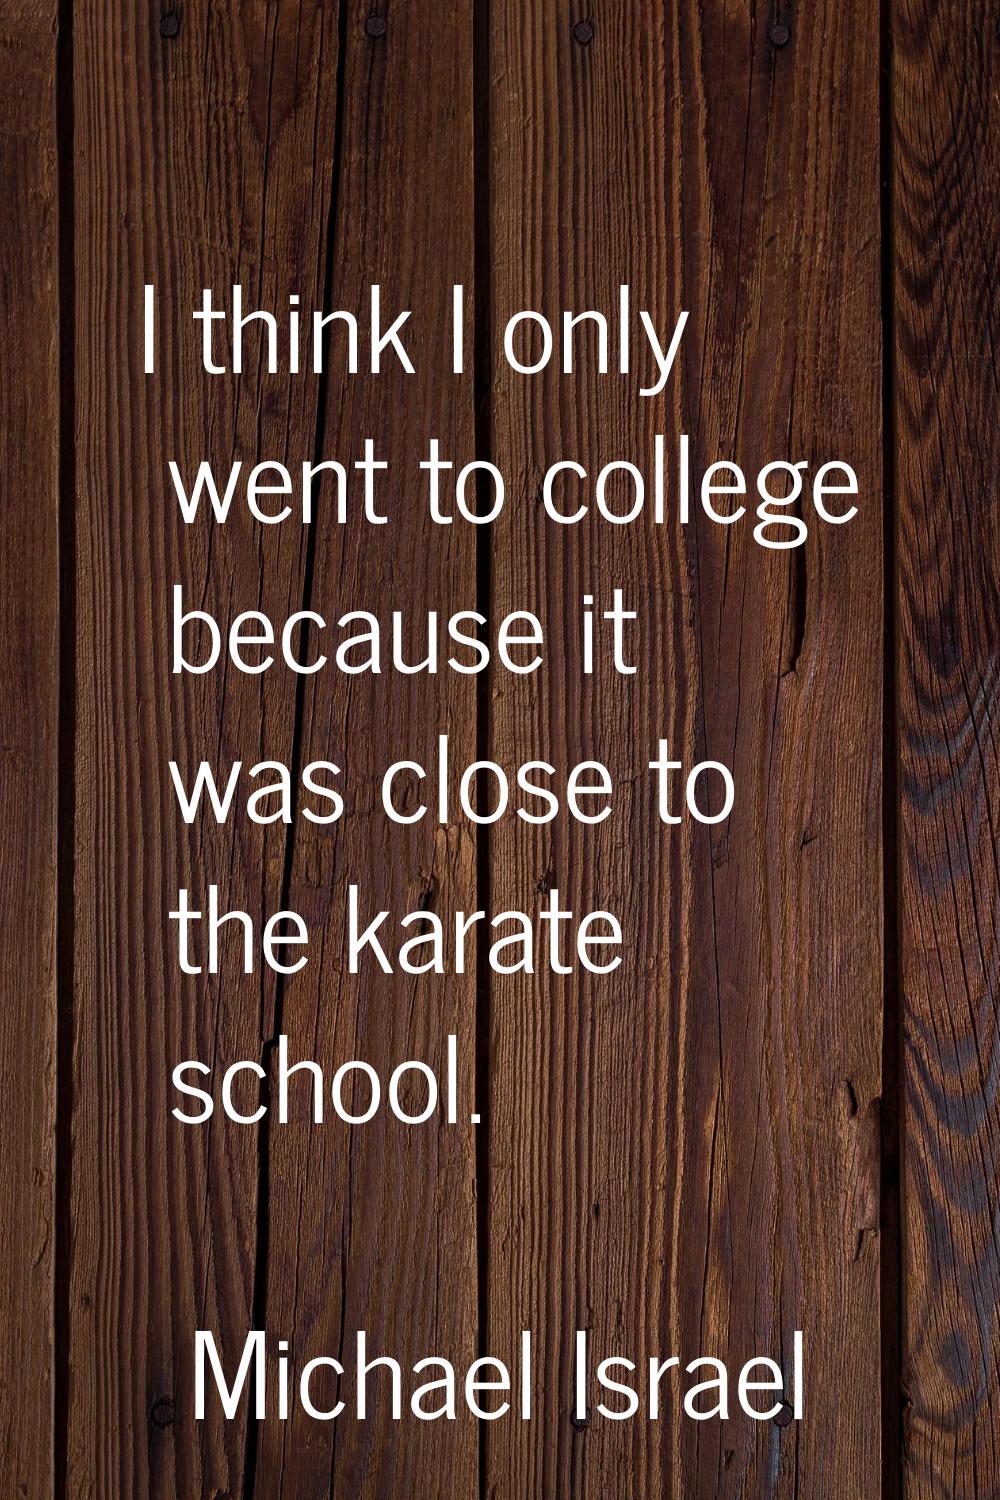 I think I only went to college because it was close to the karate school.